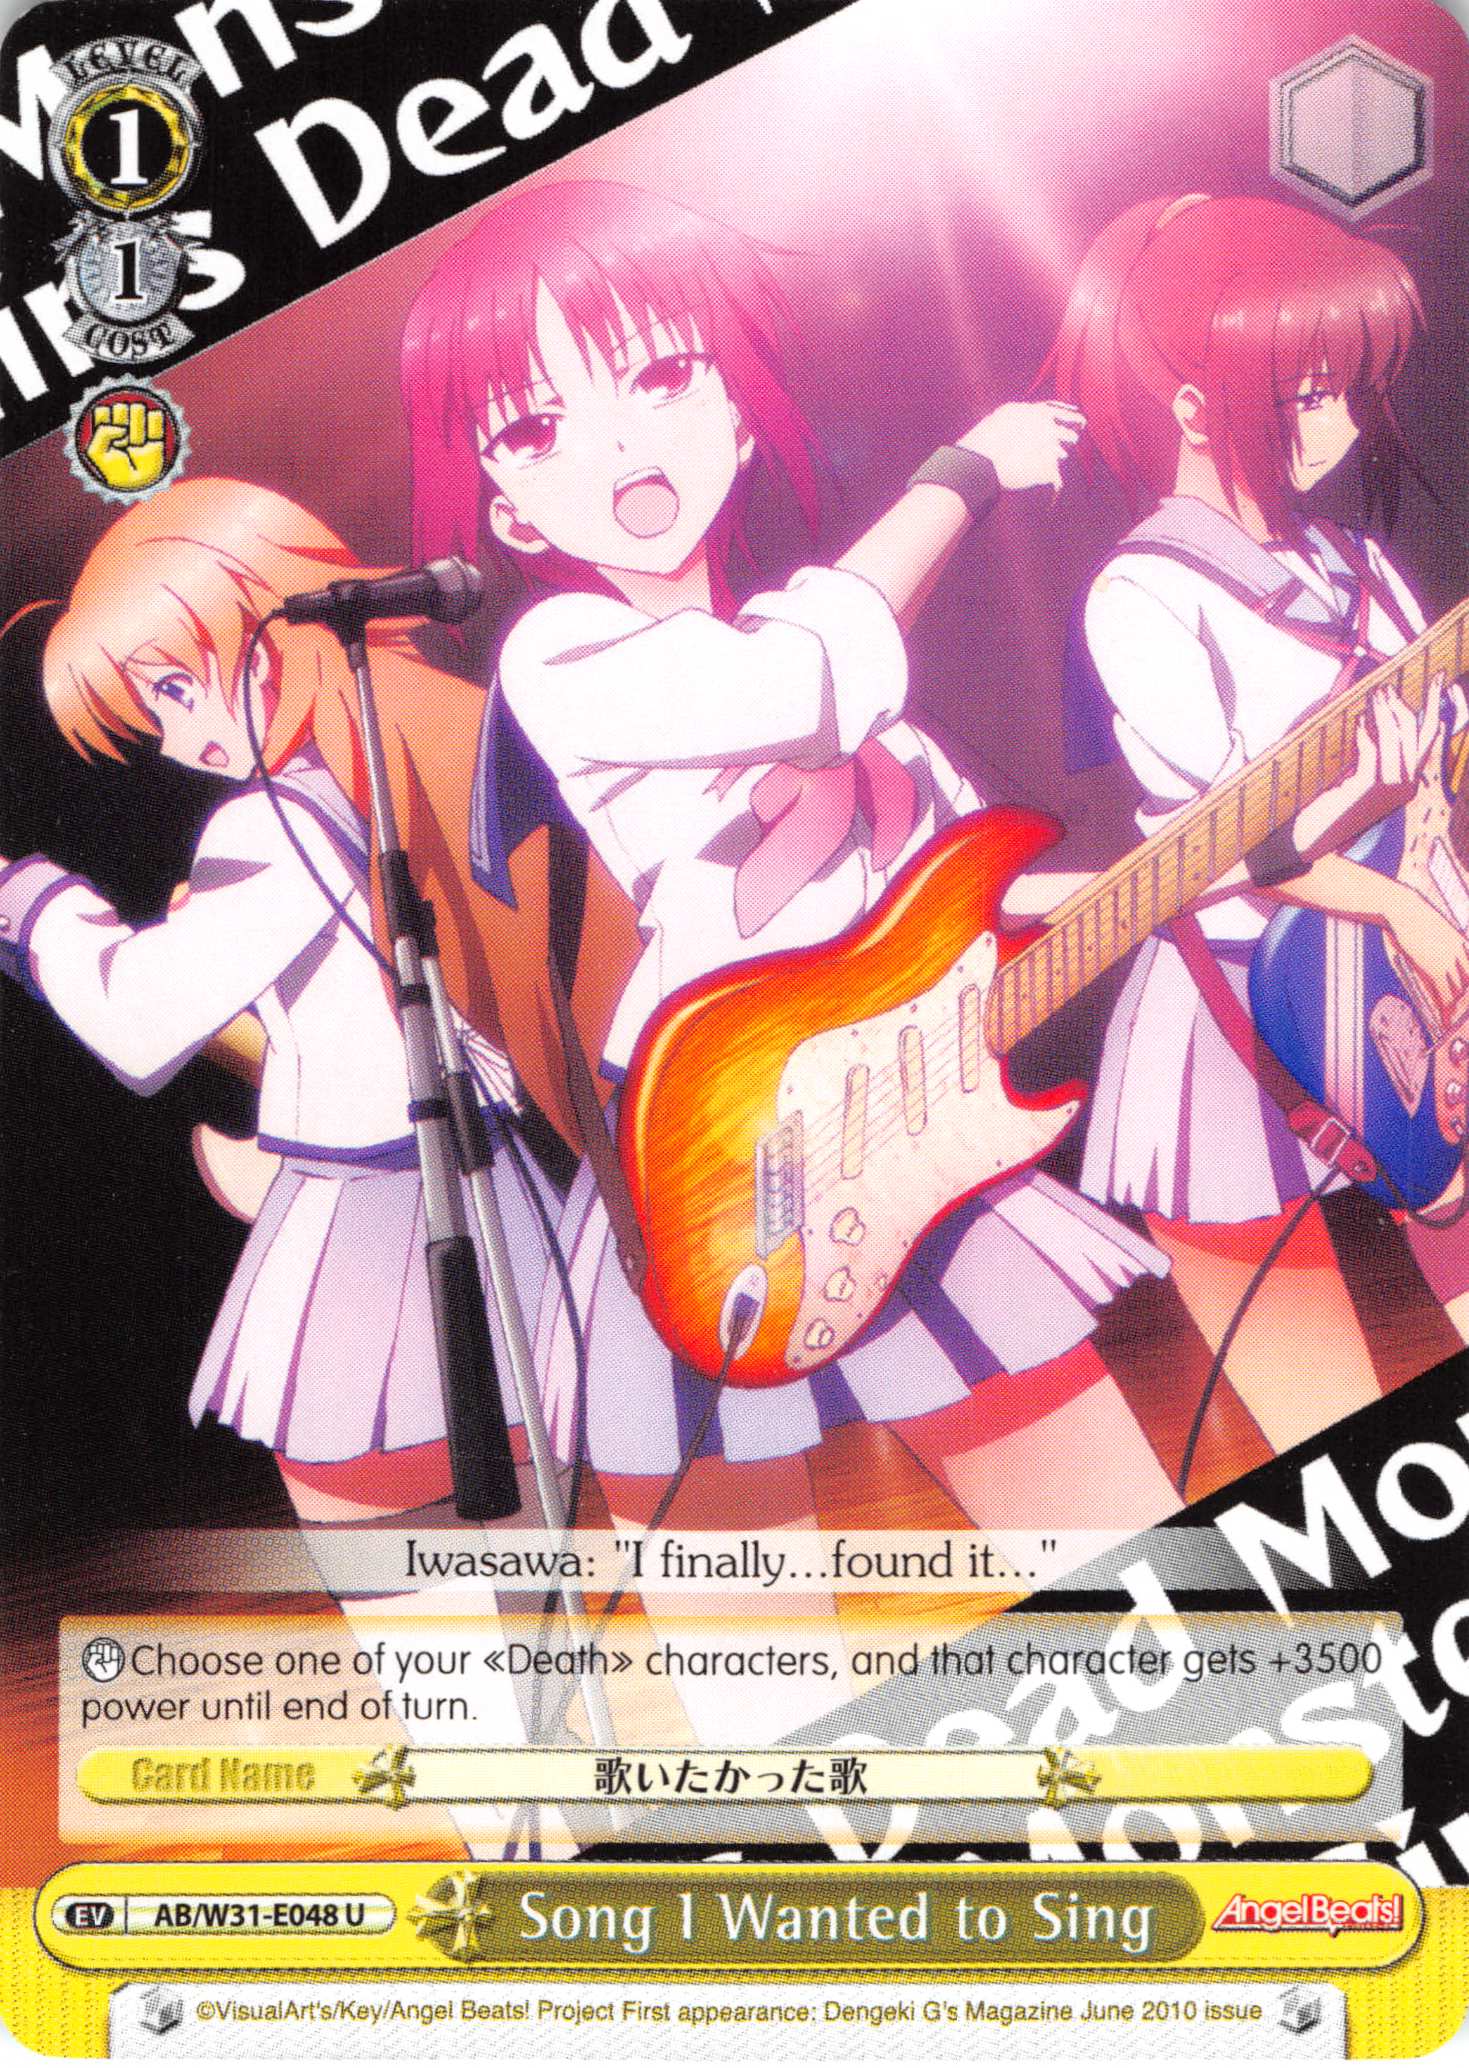 Song I Wanted to Sing (AB/W31-E048 U) [Angel Beats! Re:Edit]